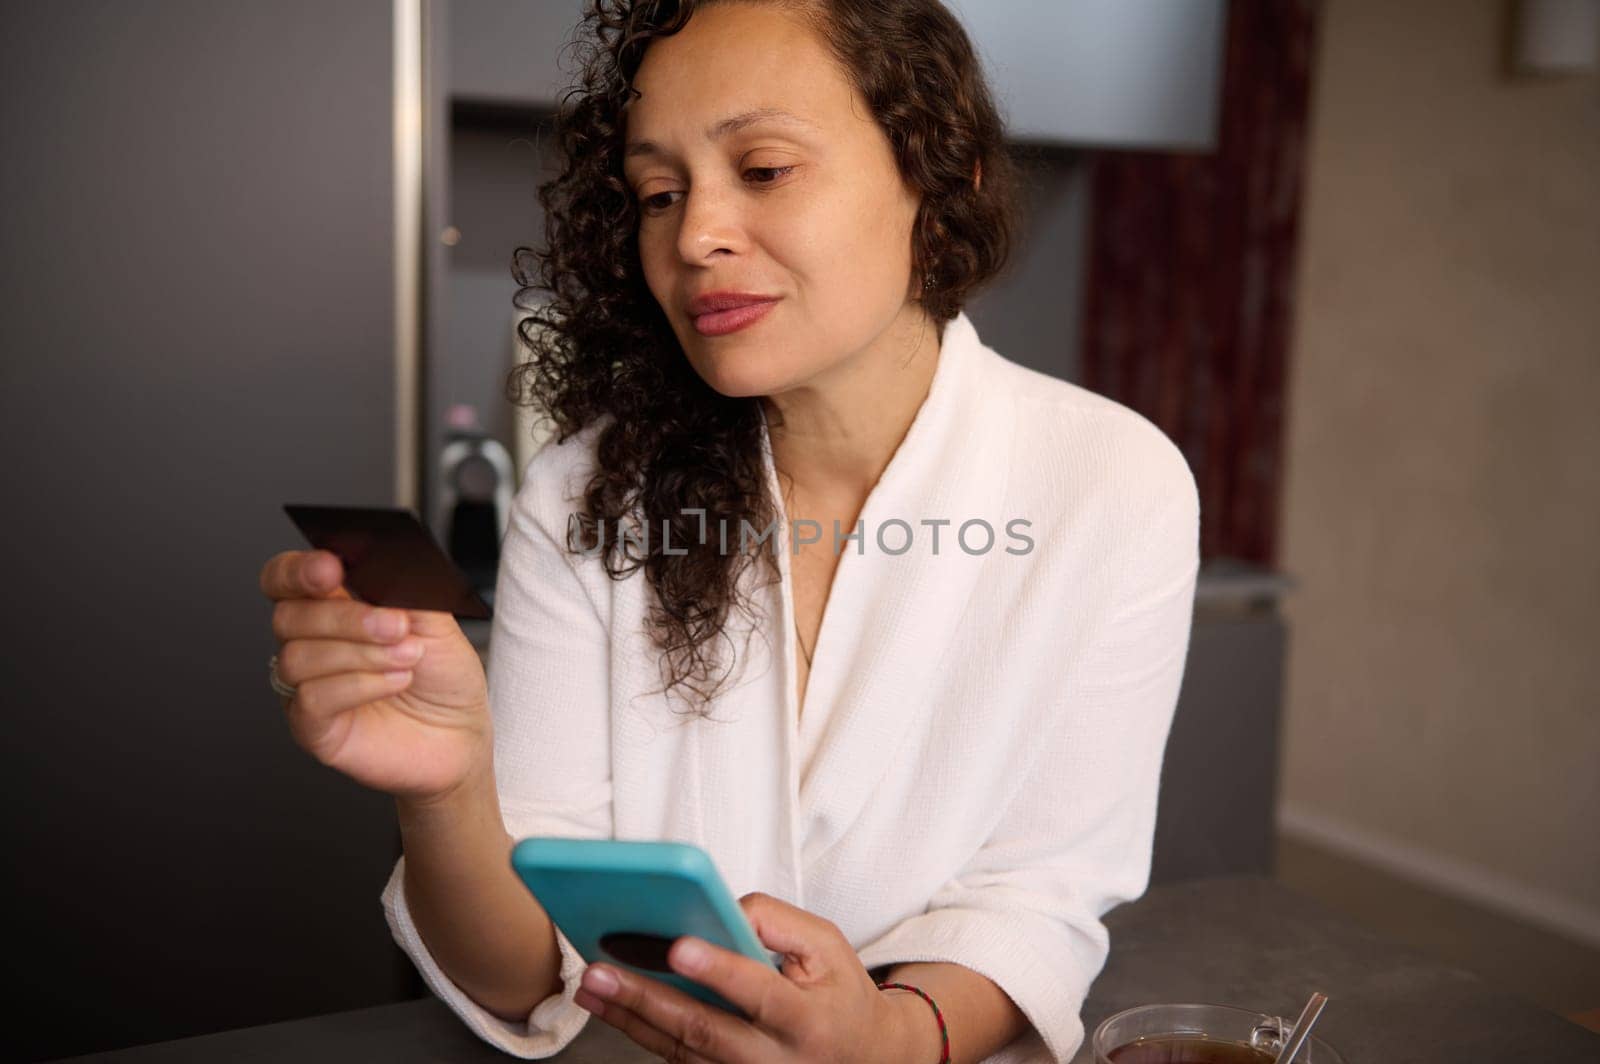 Attractive woman at home holding a black credit card and smartphone, booking hotel, ordering food, transferring money via internet banking, making payment, using mobile app. Copy advertising space